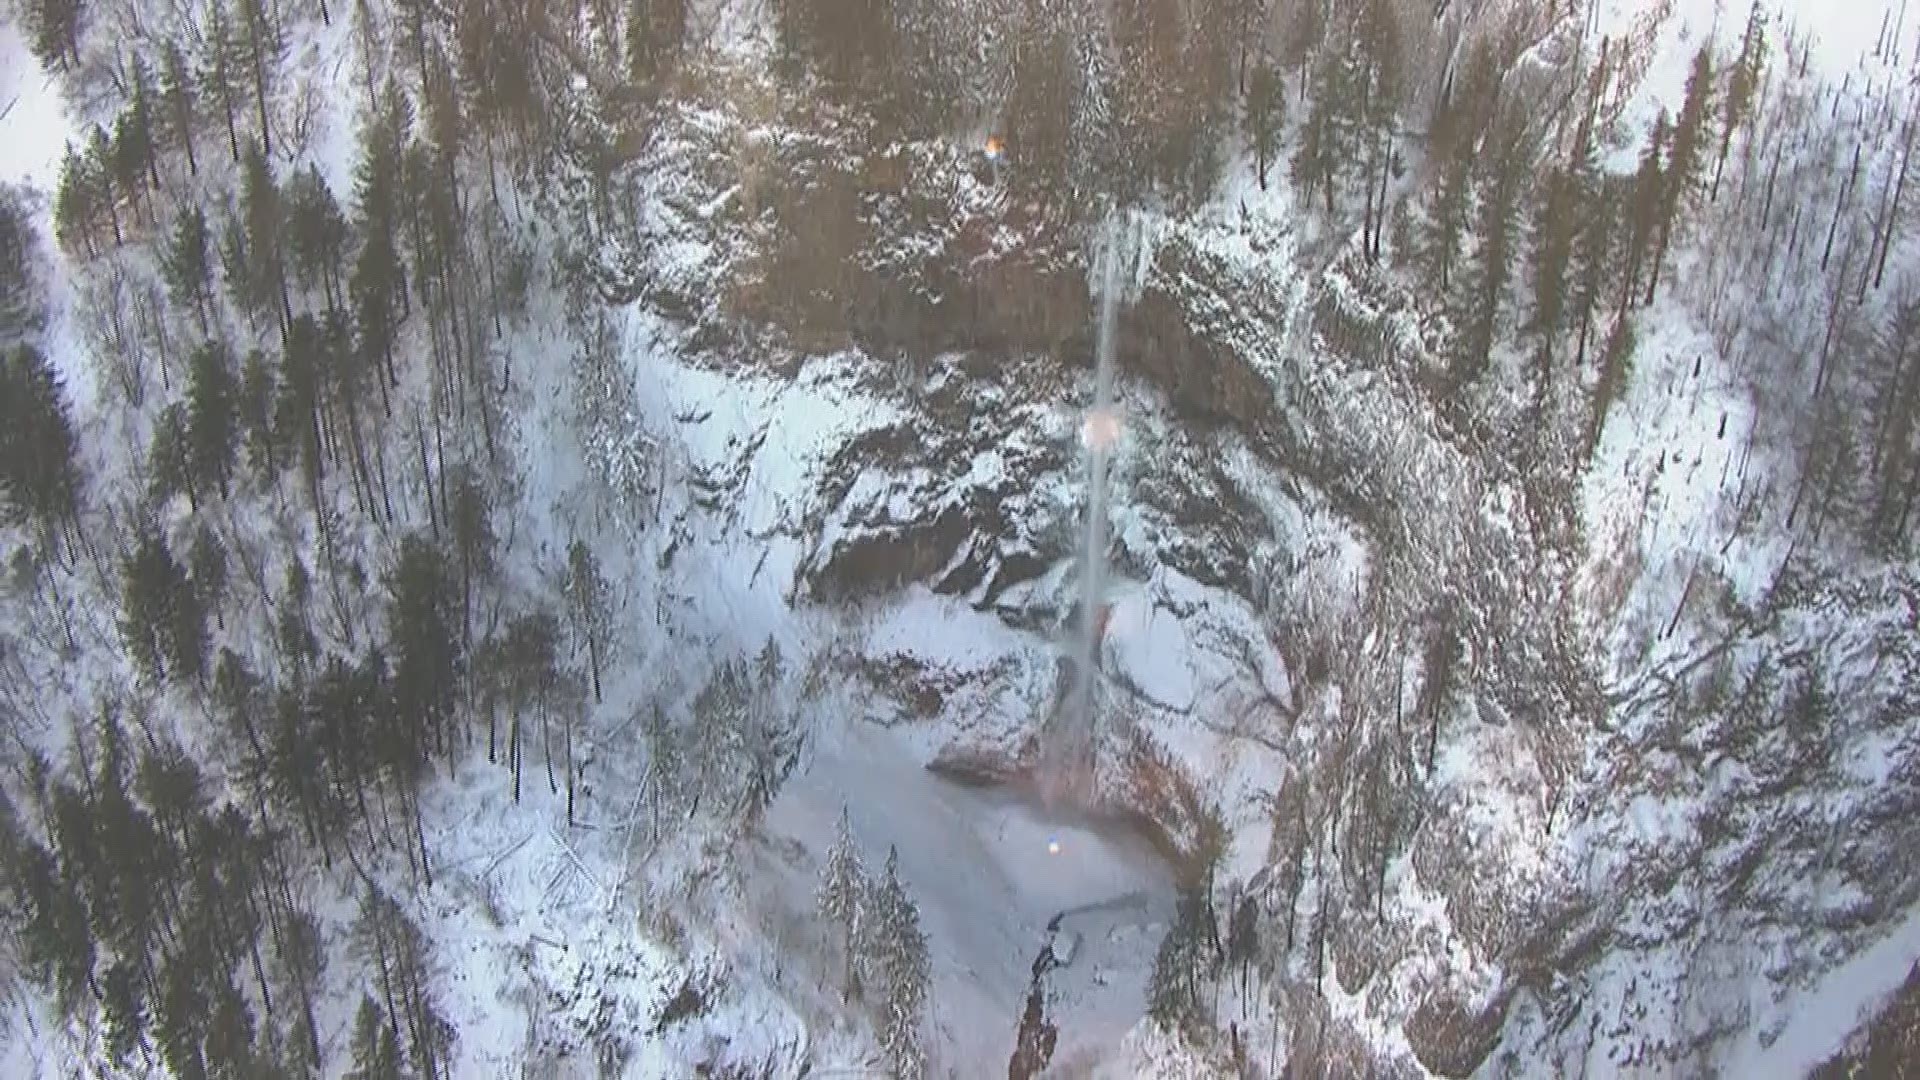 Here's a look from above at Multnomah Falls on Sunday, Feb. 10. Sky 8 caught these images while touring the snowy Portland metro area after the weekend's winter weather subsided.